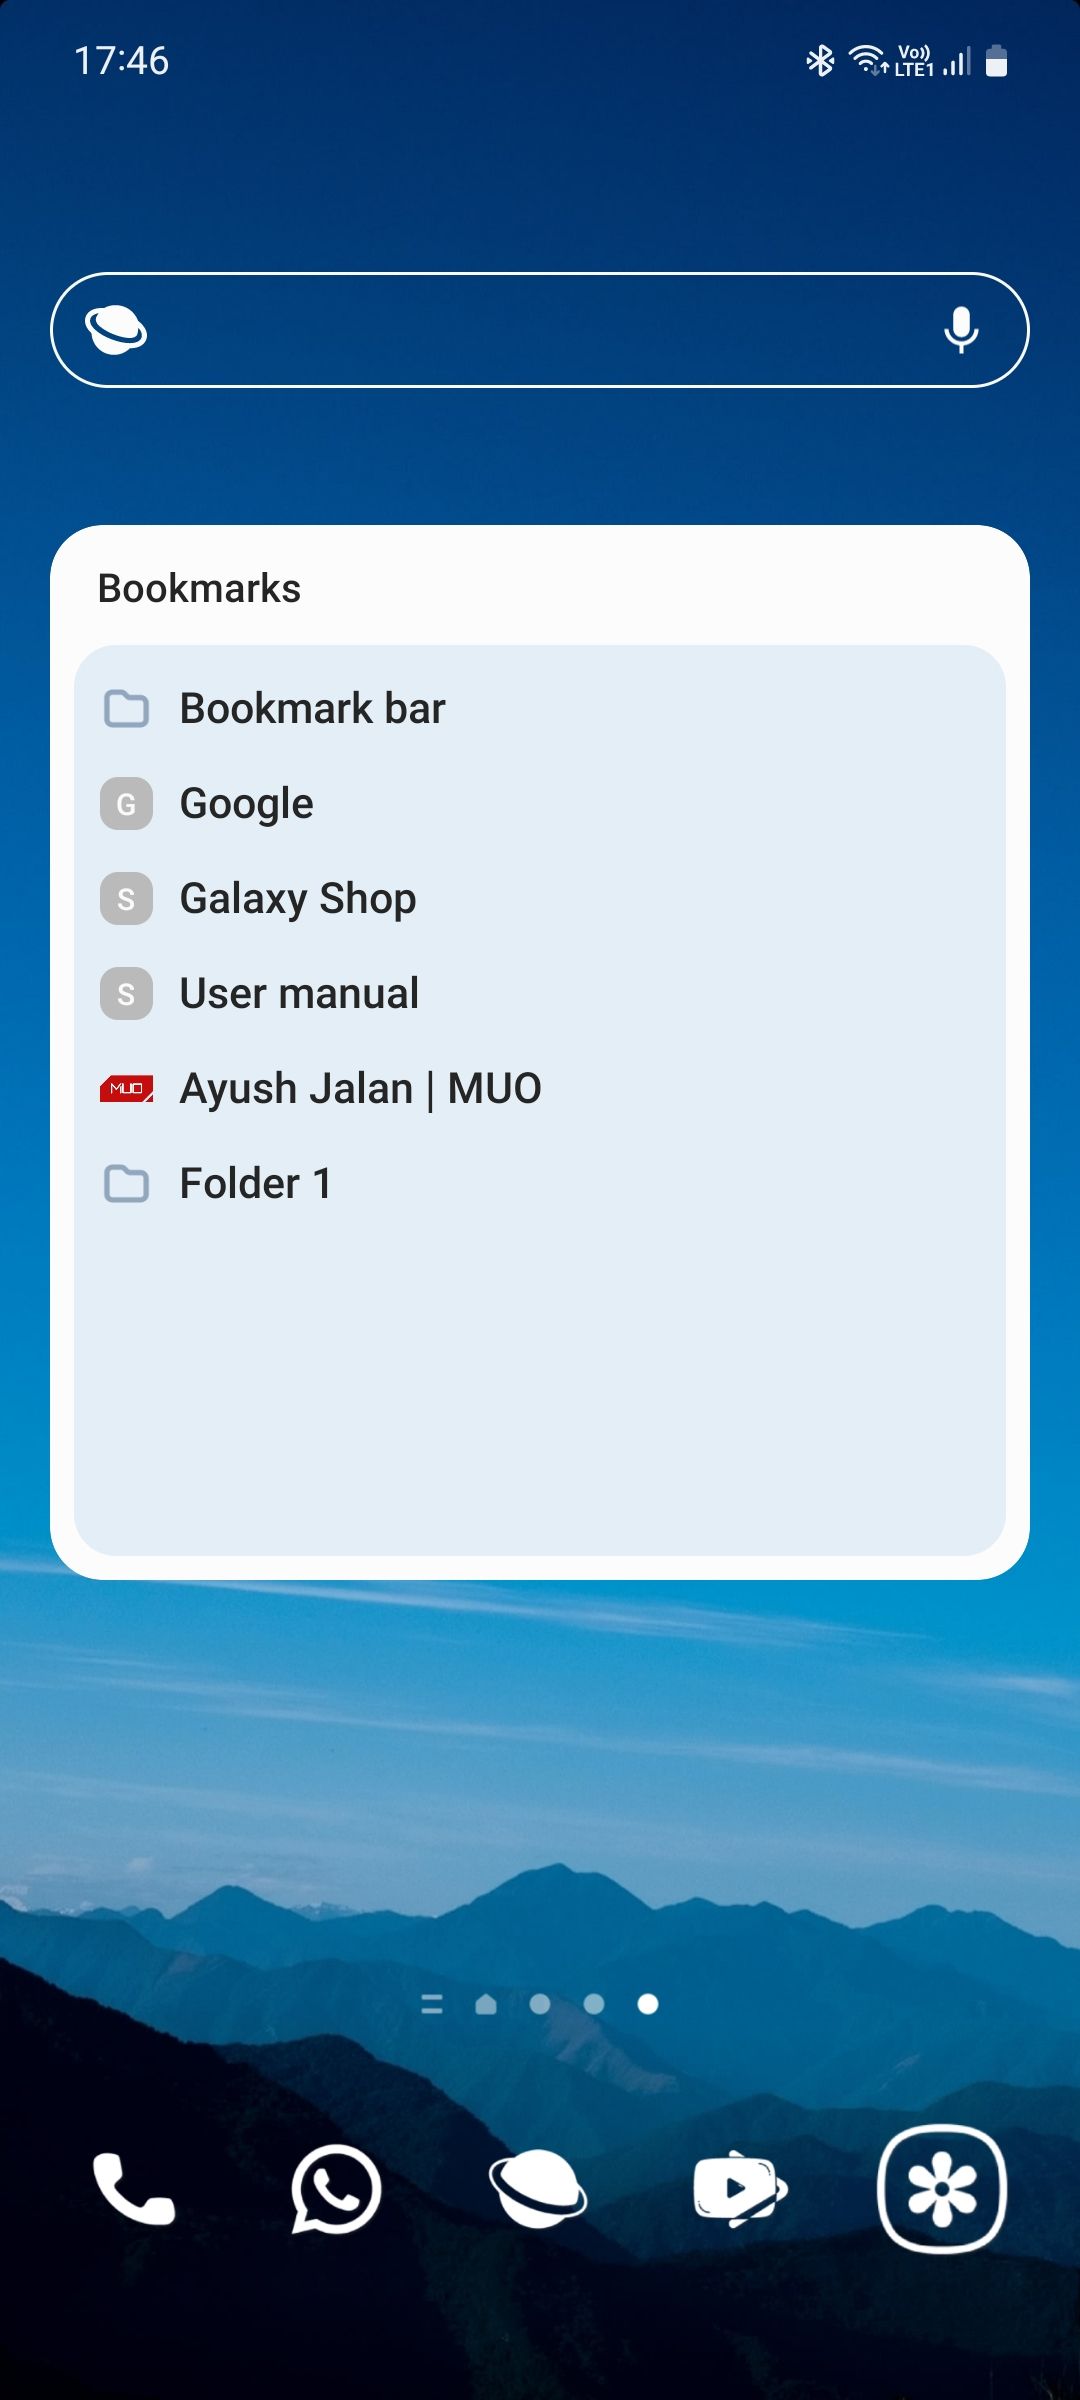 Samsung Internet Search and Bookmarks widgets on Home screen